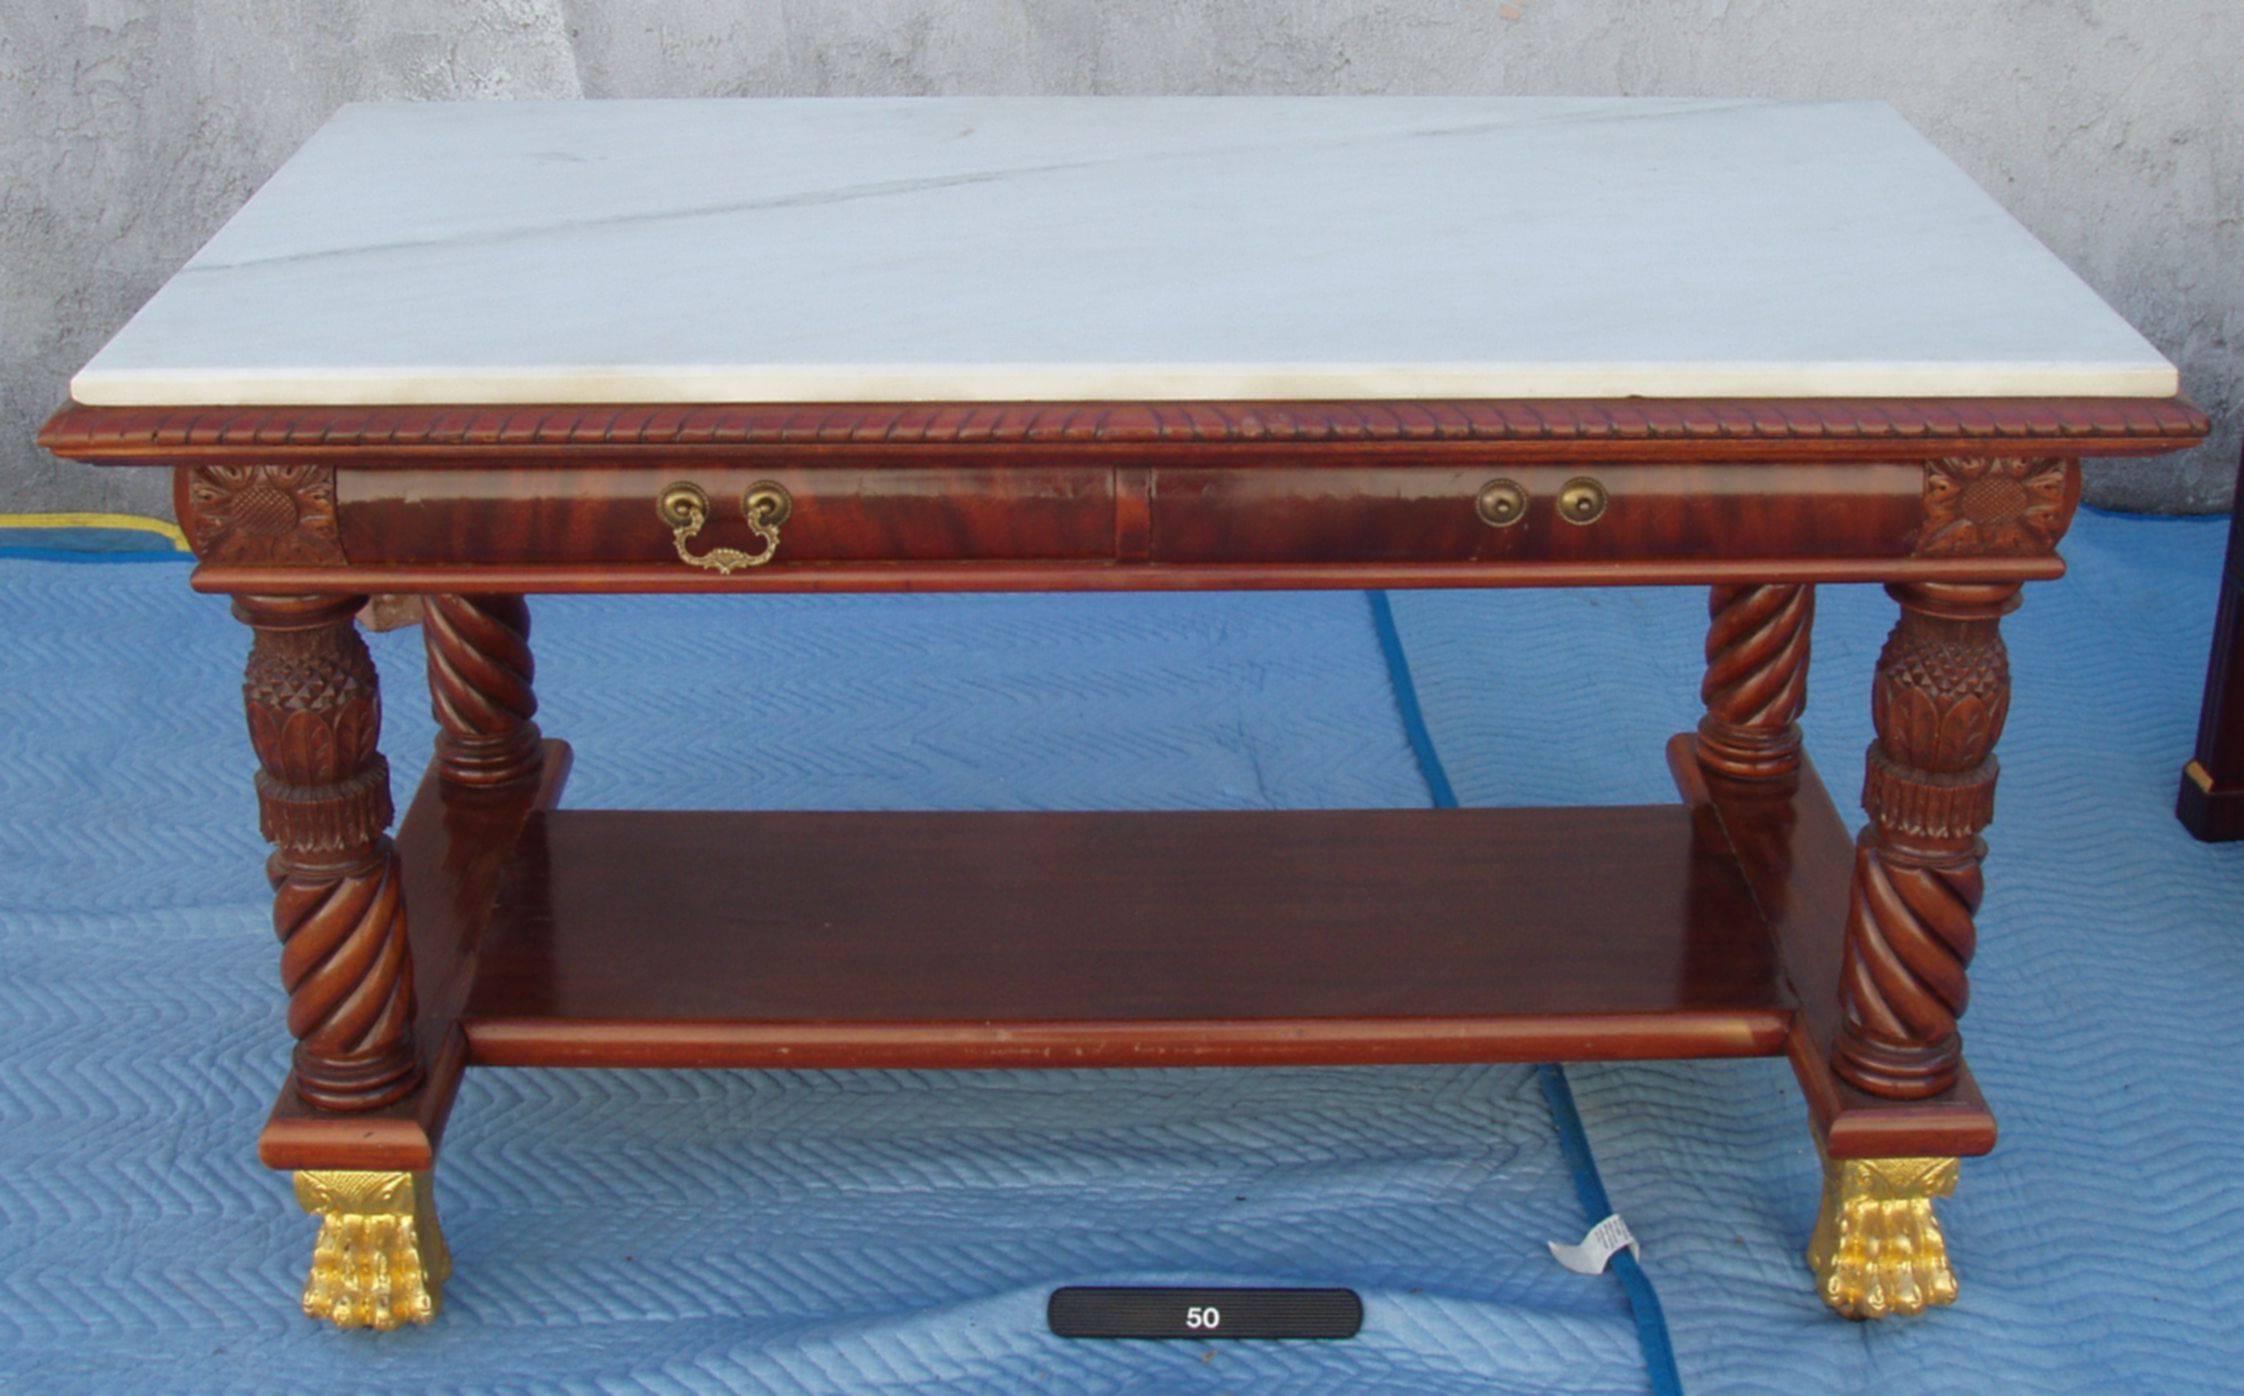 A superb early 19th century, American Federal style centre library table or desk or writing table-
a 'Tour de Force' American museum piece of quality and style.
Full figured mahogany with giltwood claw feet on recessed casters, finely carved legs